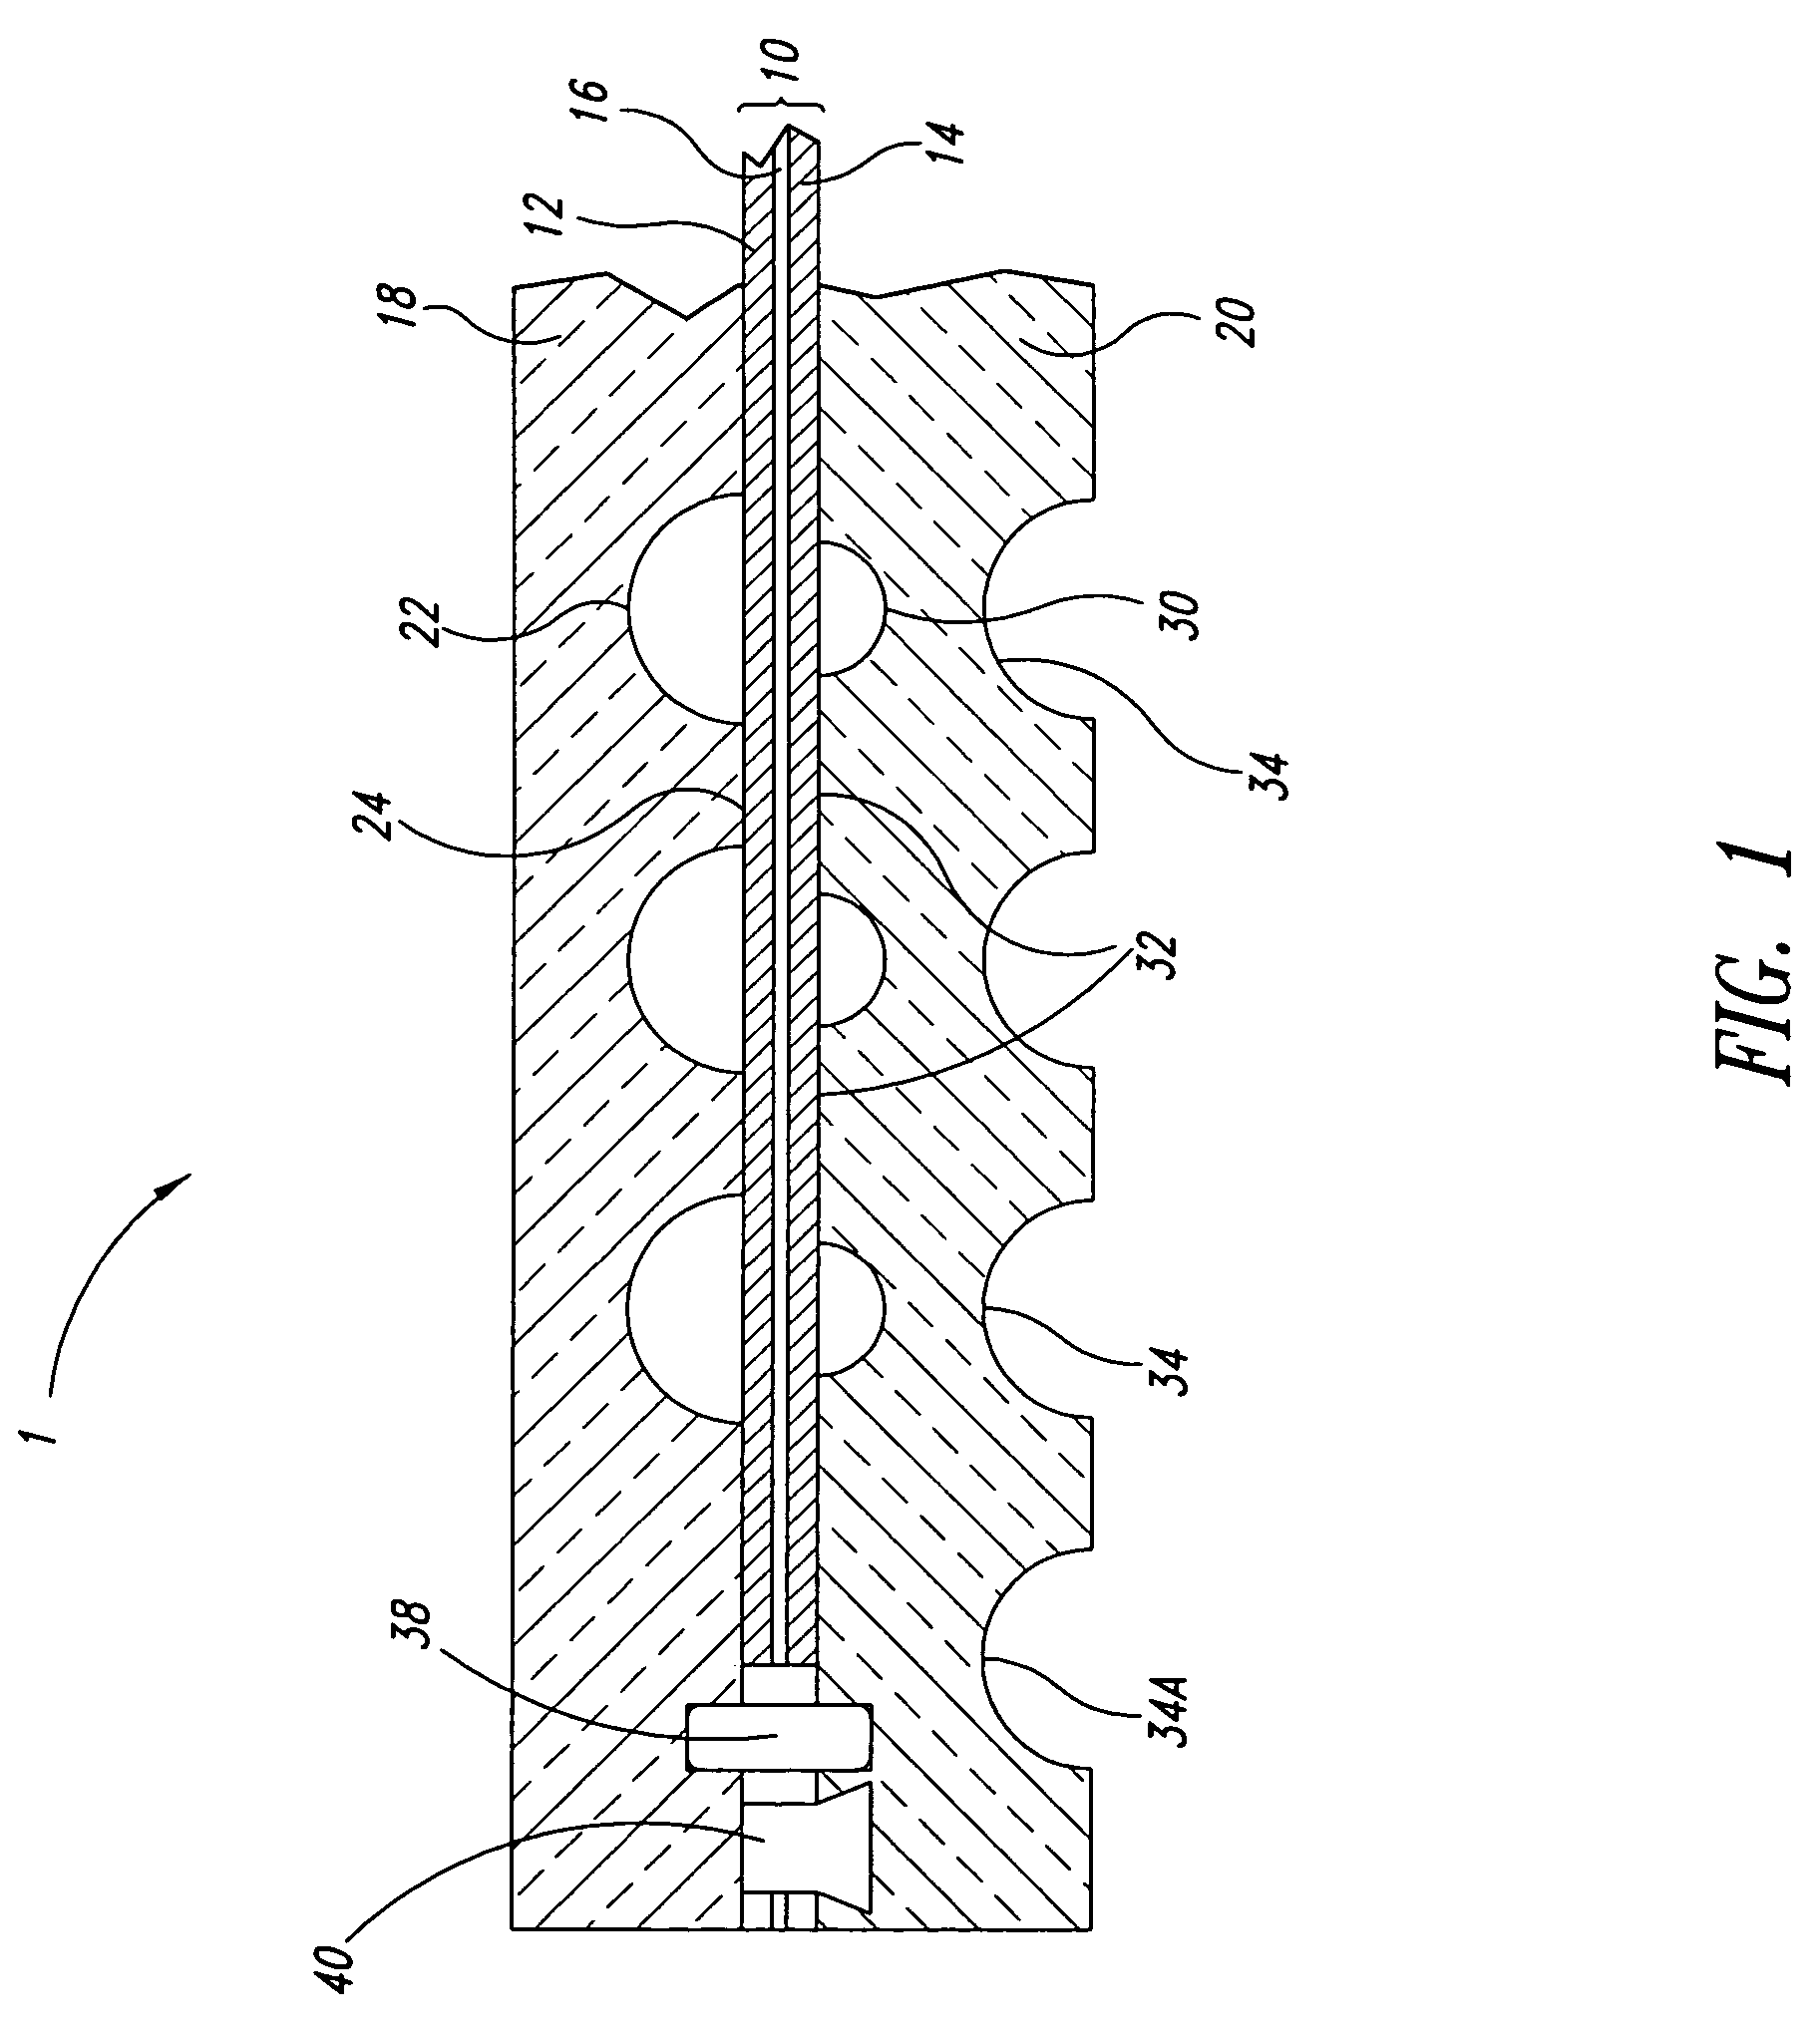 Electrochemical fuel cell stack having a plurality of integrated voltage reversal protection diodes